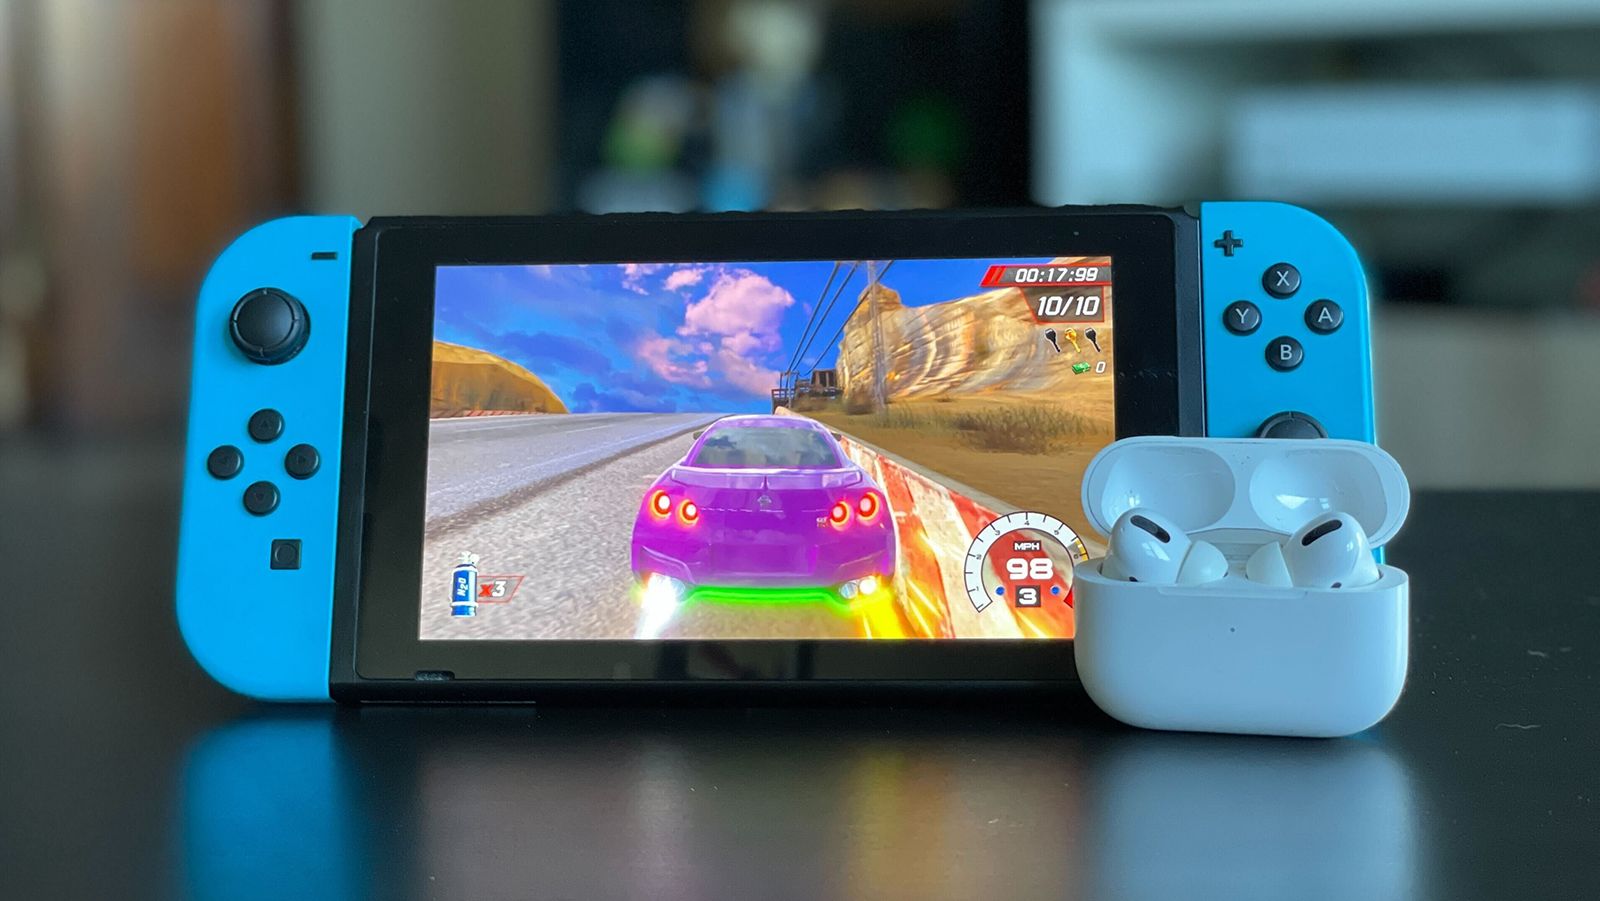 Top 5 FREE Games for the Nintendo Switch in 2020 - ESR Blog